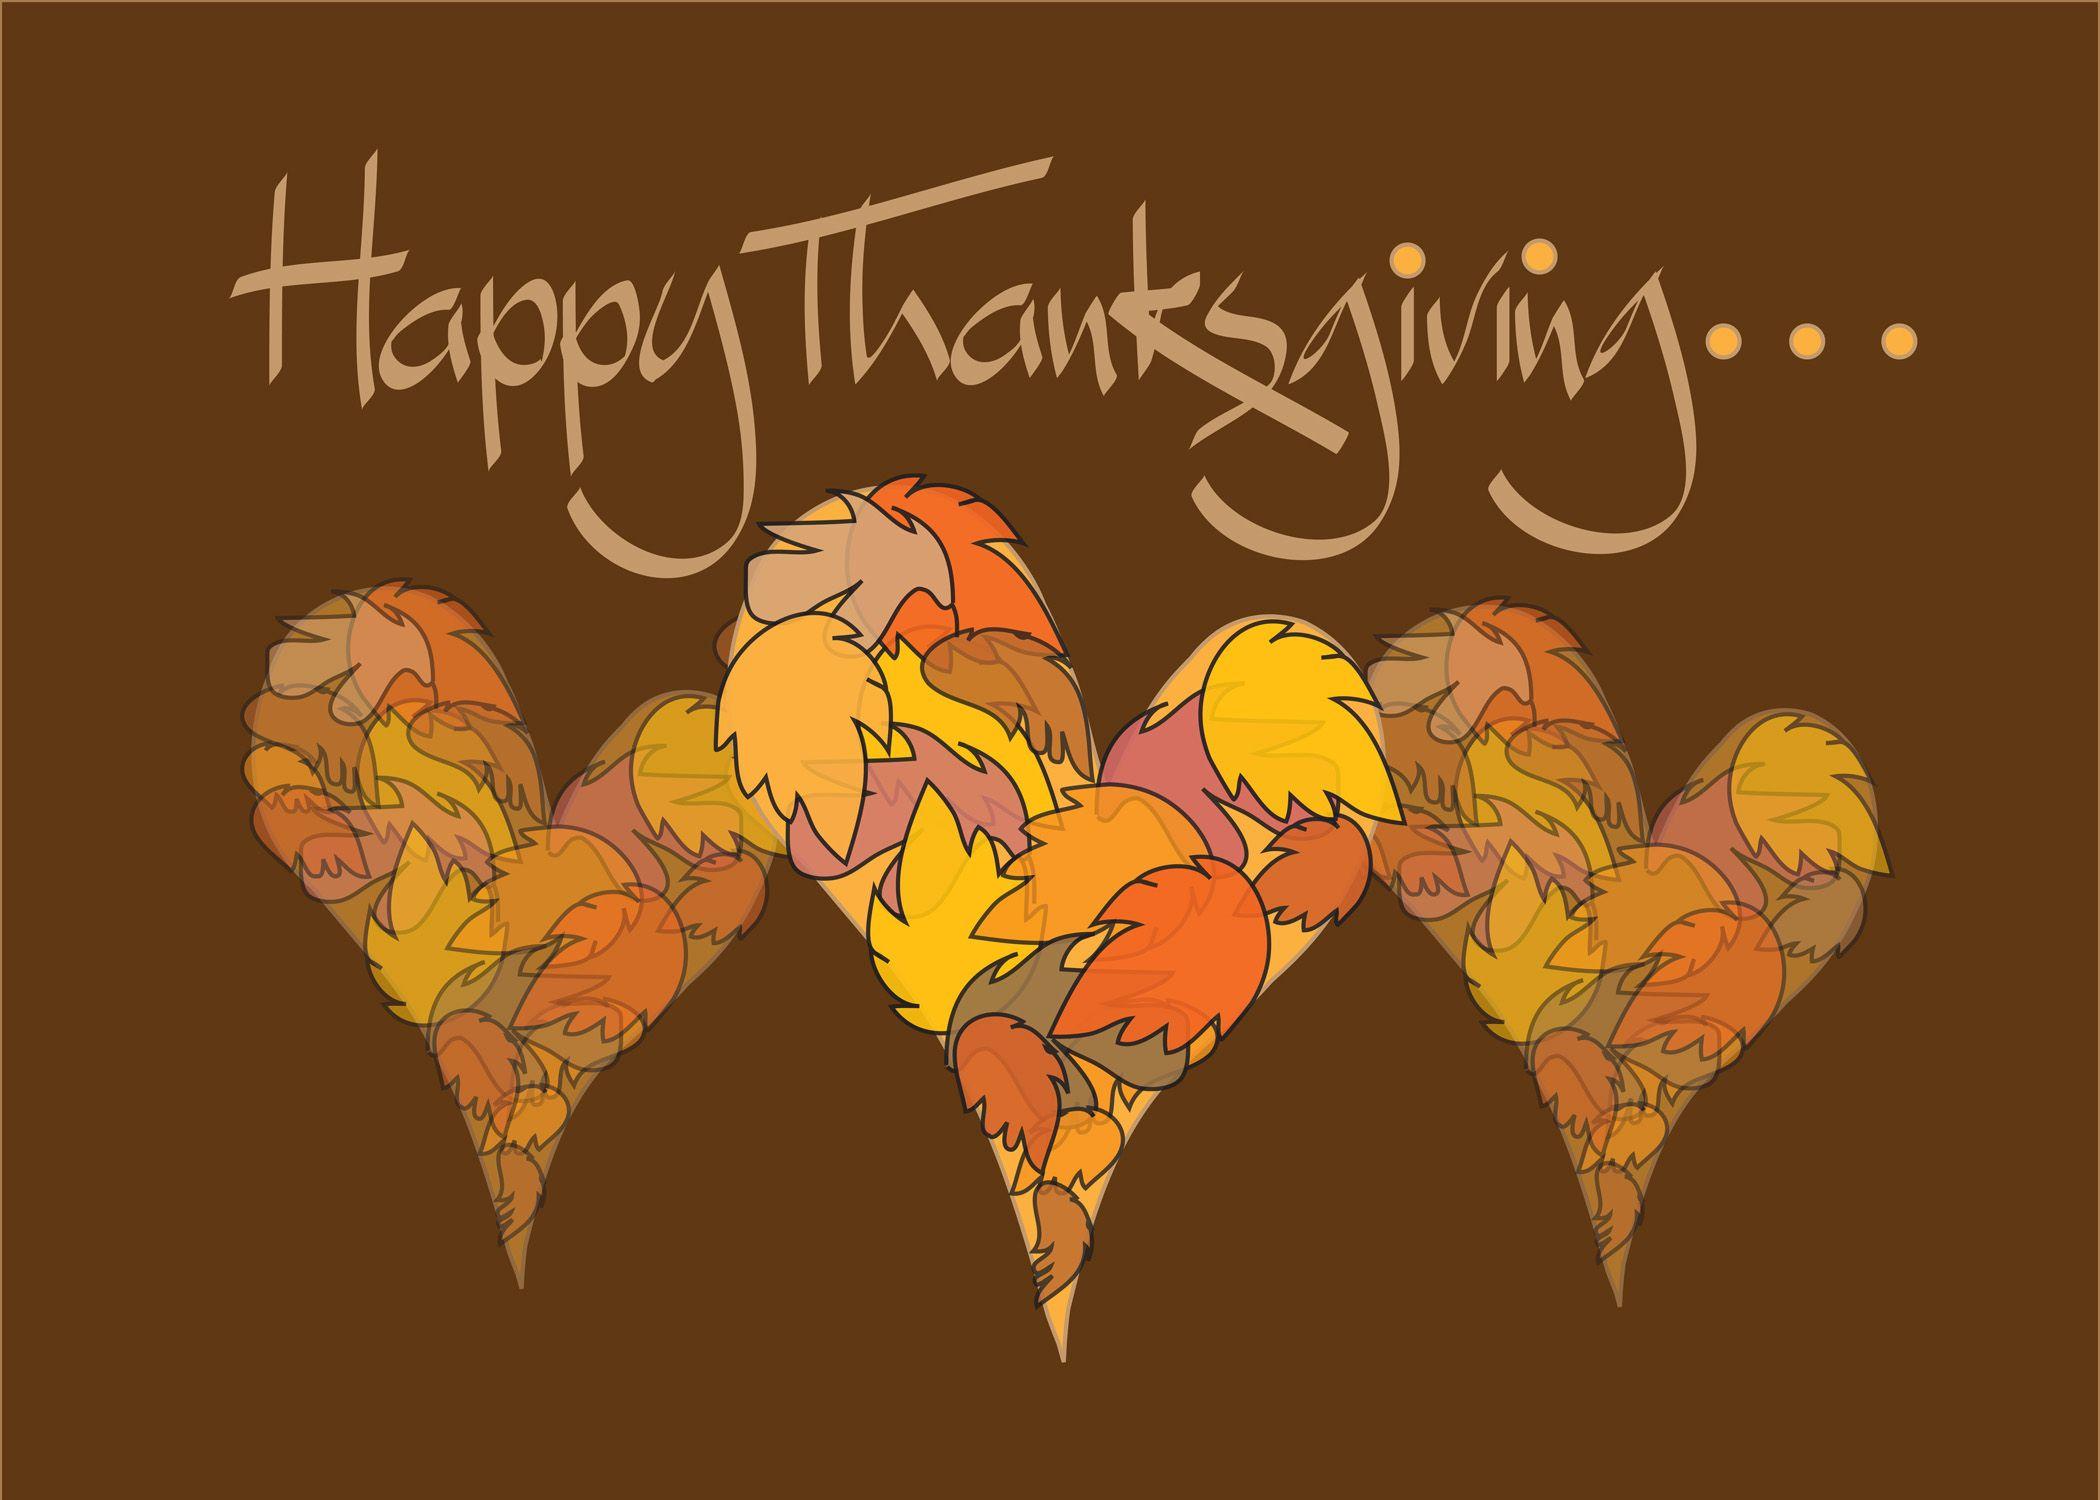 Happy Thanksgiving Day 2012 HD Wallpaper. Happy thanksgiving wallpaper, Thanksgiving picture, Thanksgiving image